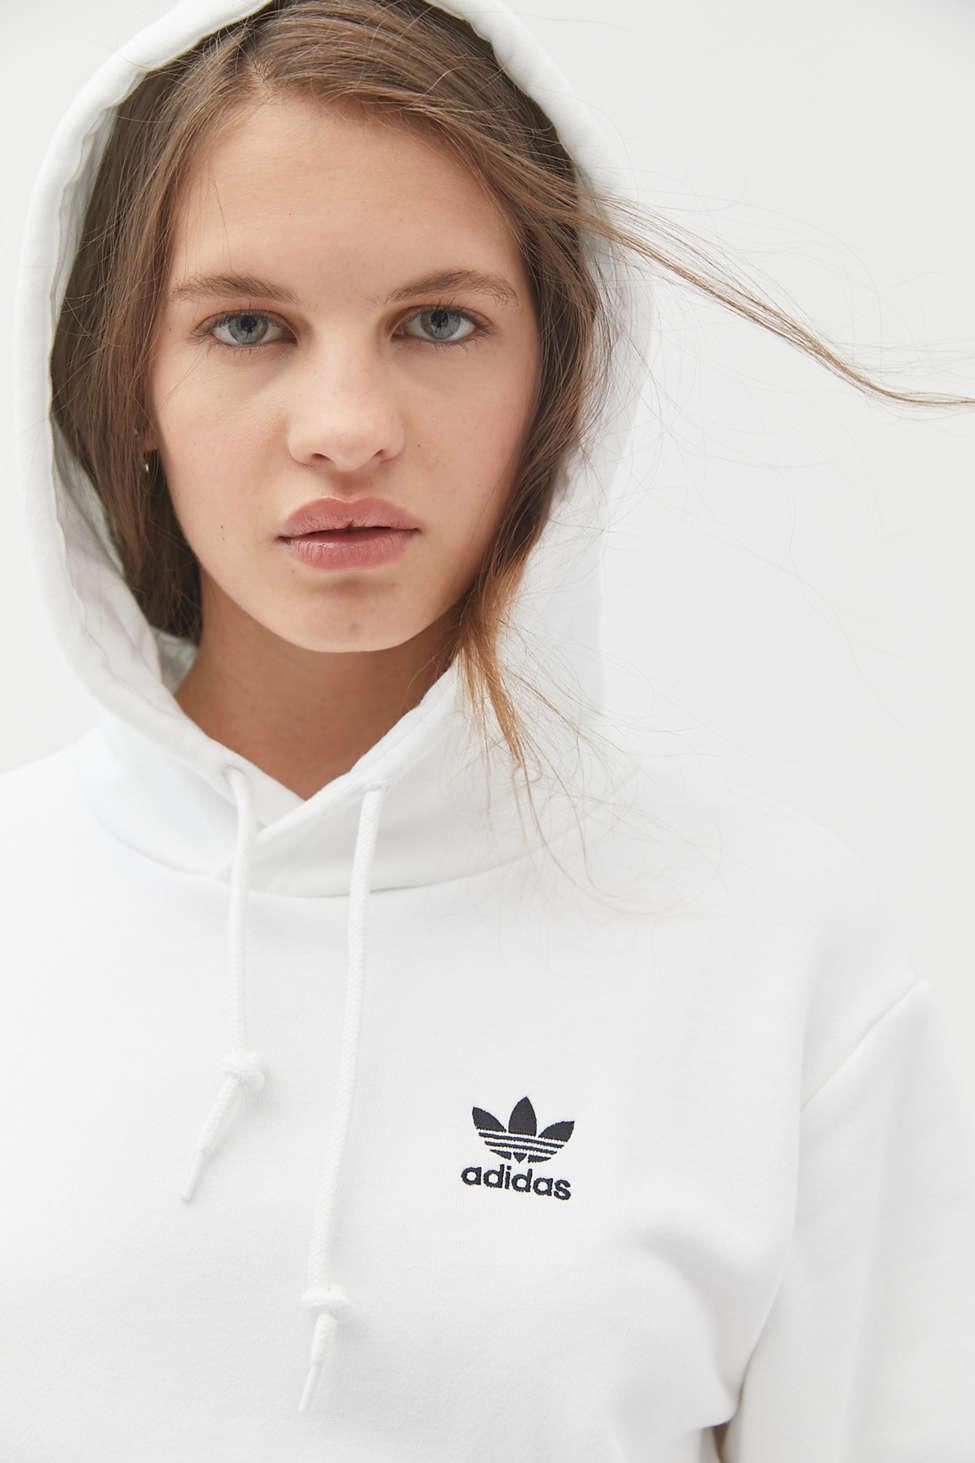 adidas hoodie brand with the 3 stripes